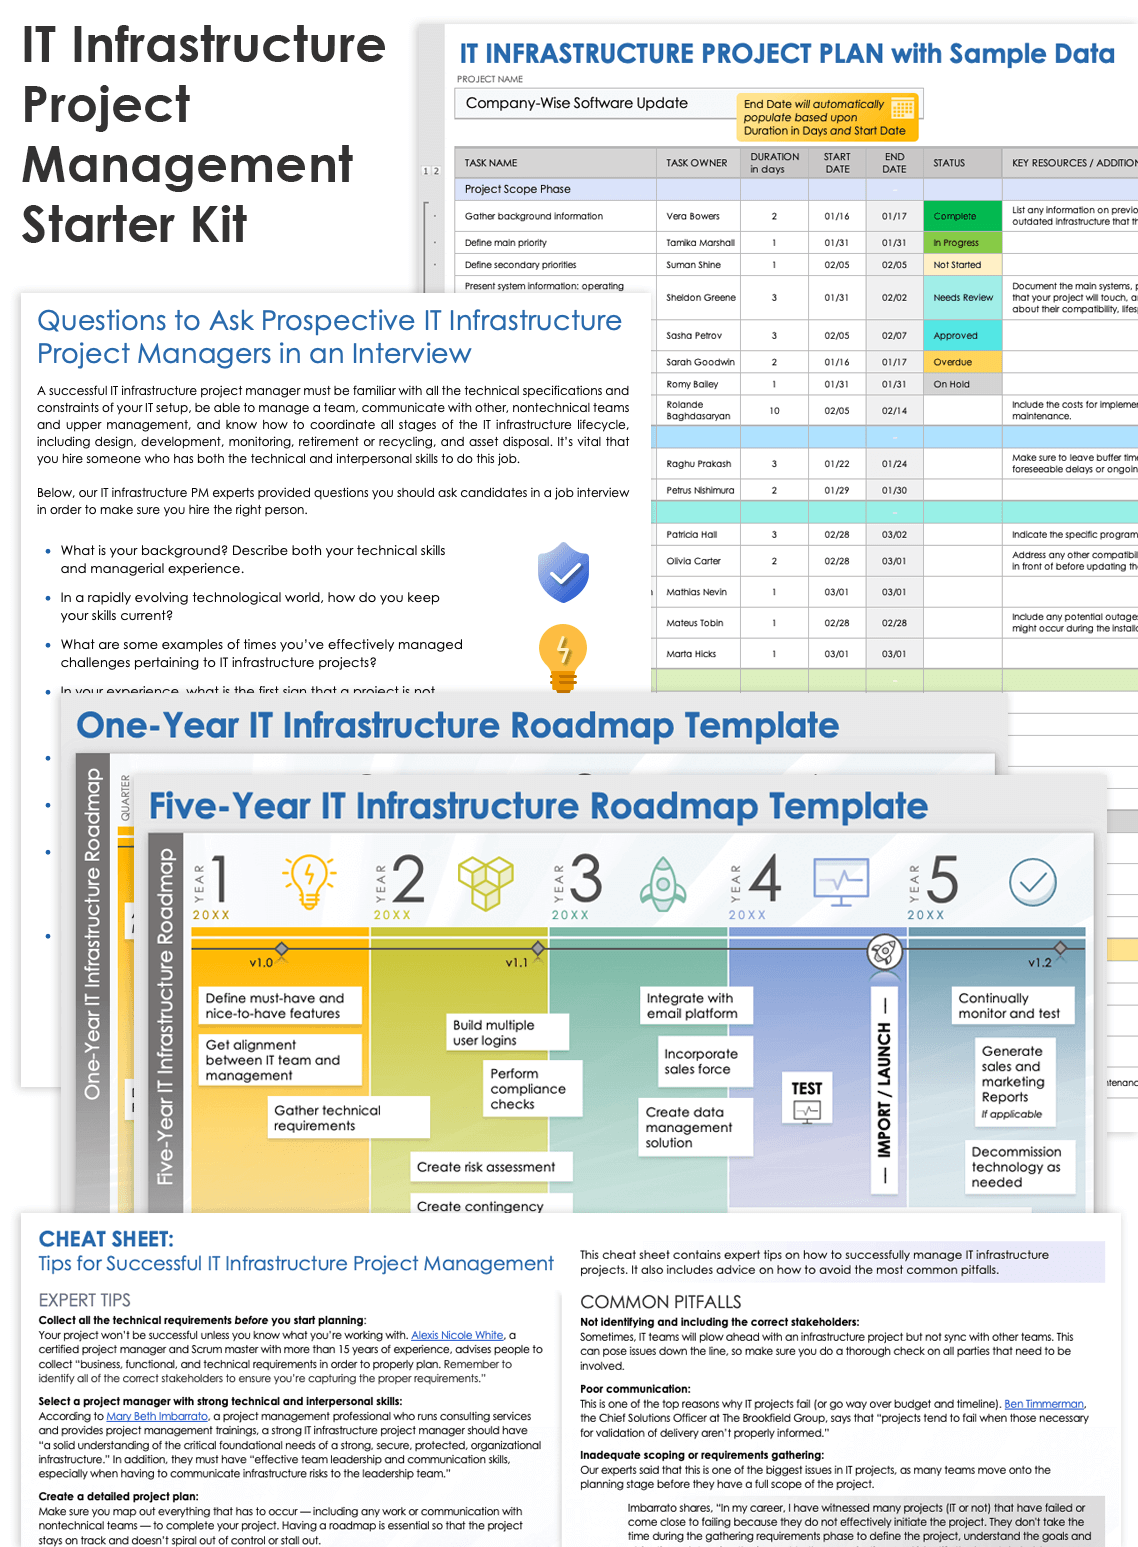 IT Infrastructure Project Management Starter Kit